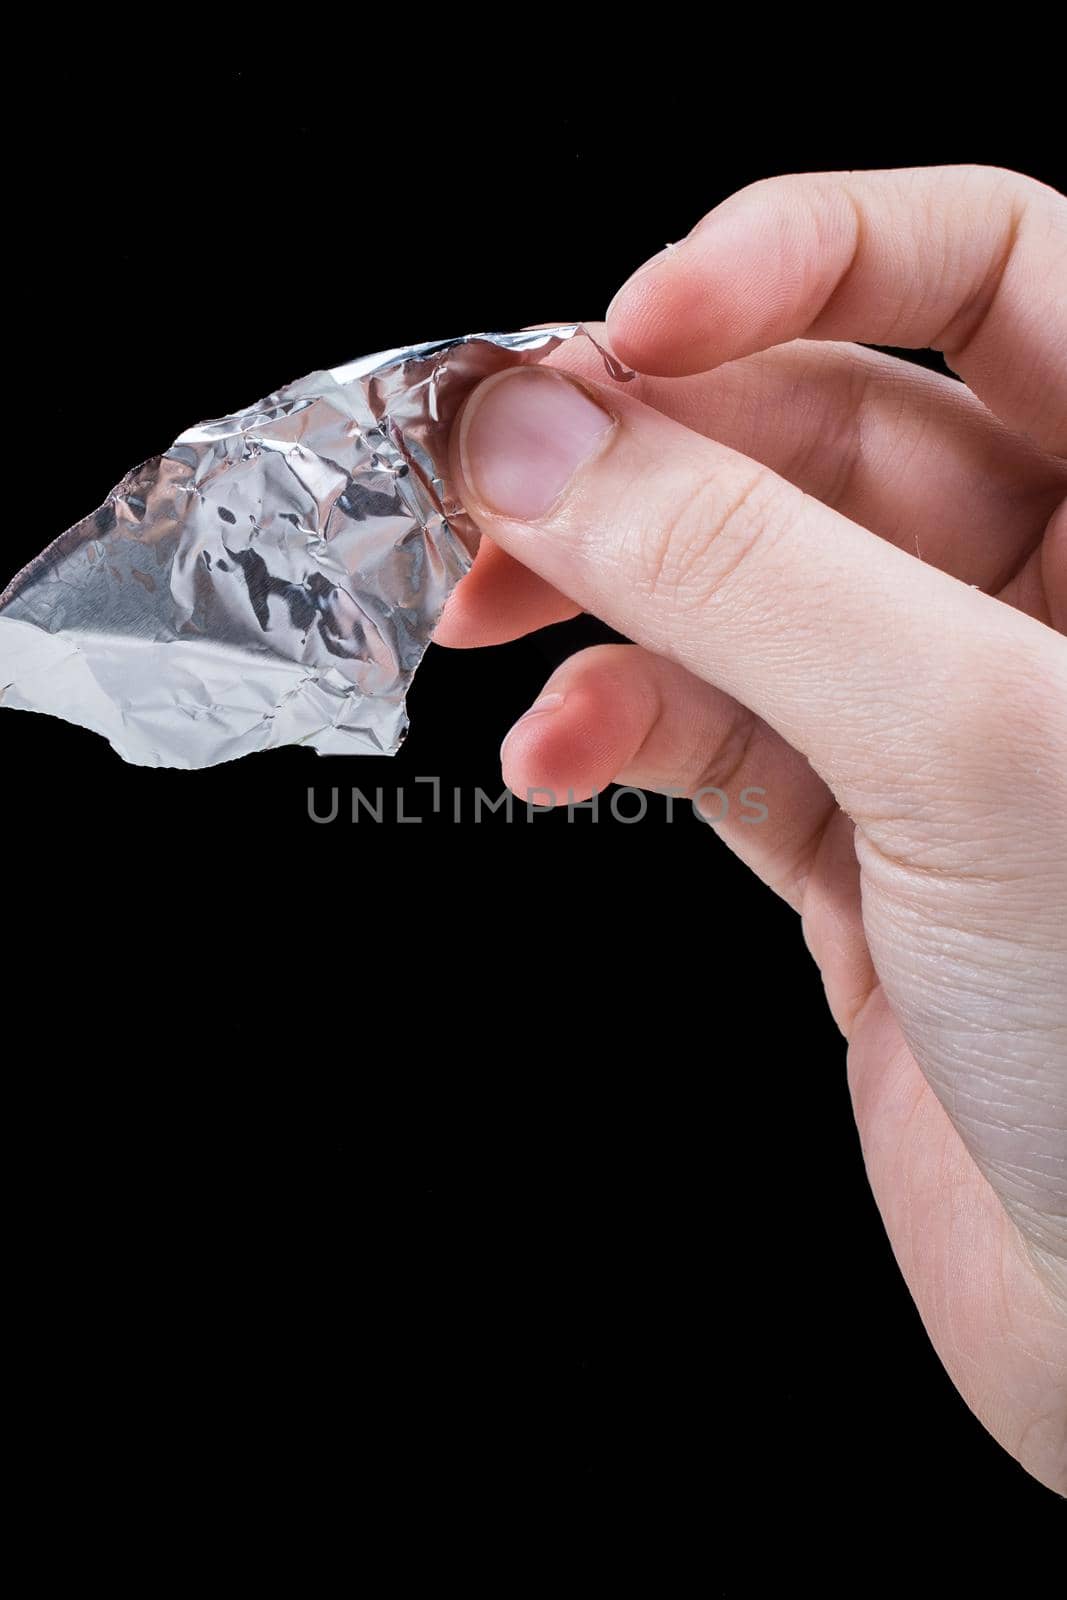 Hand tearing a heart shaped aluminium foil on wooden background by berkay